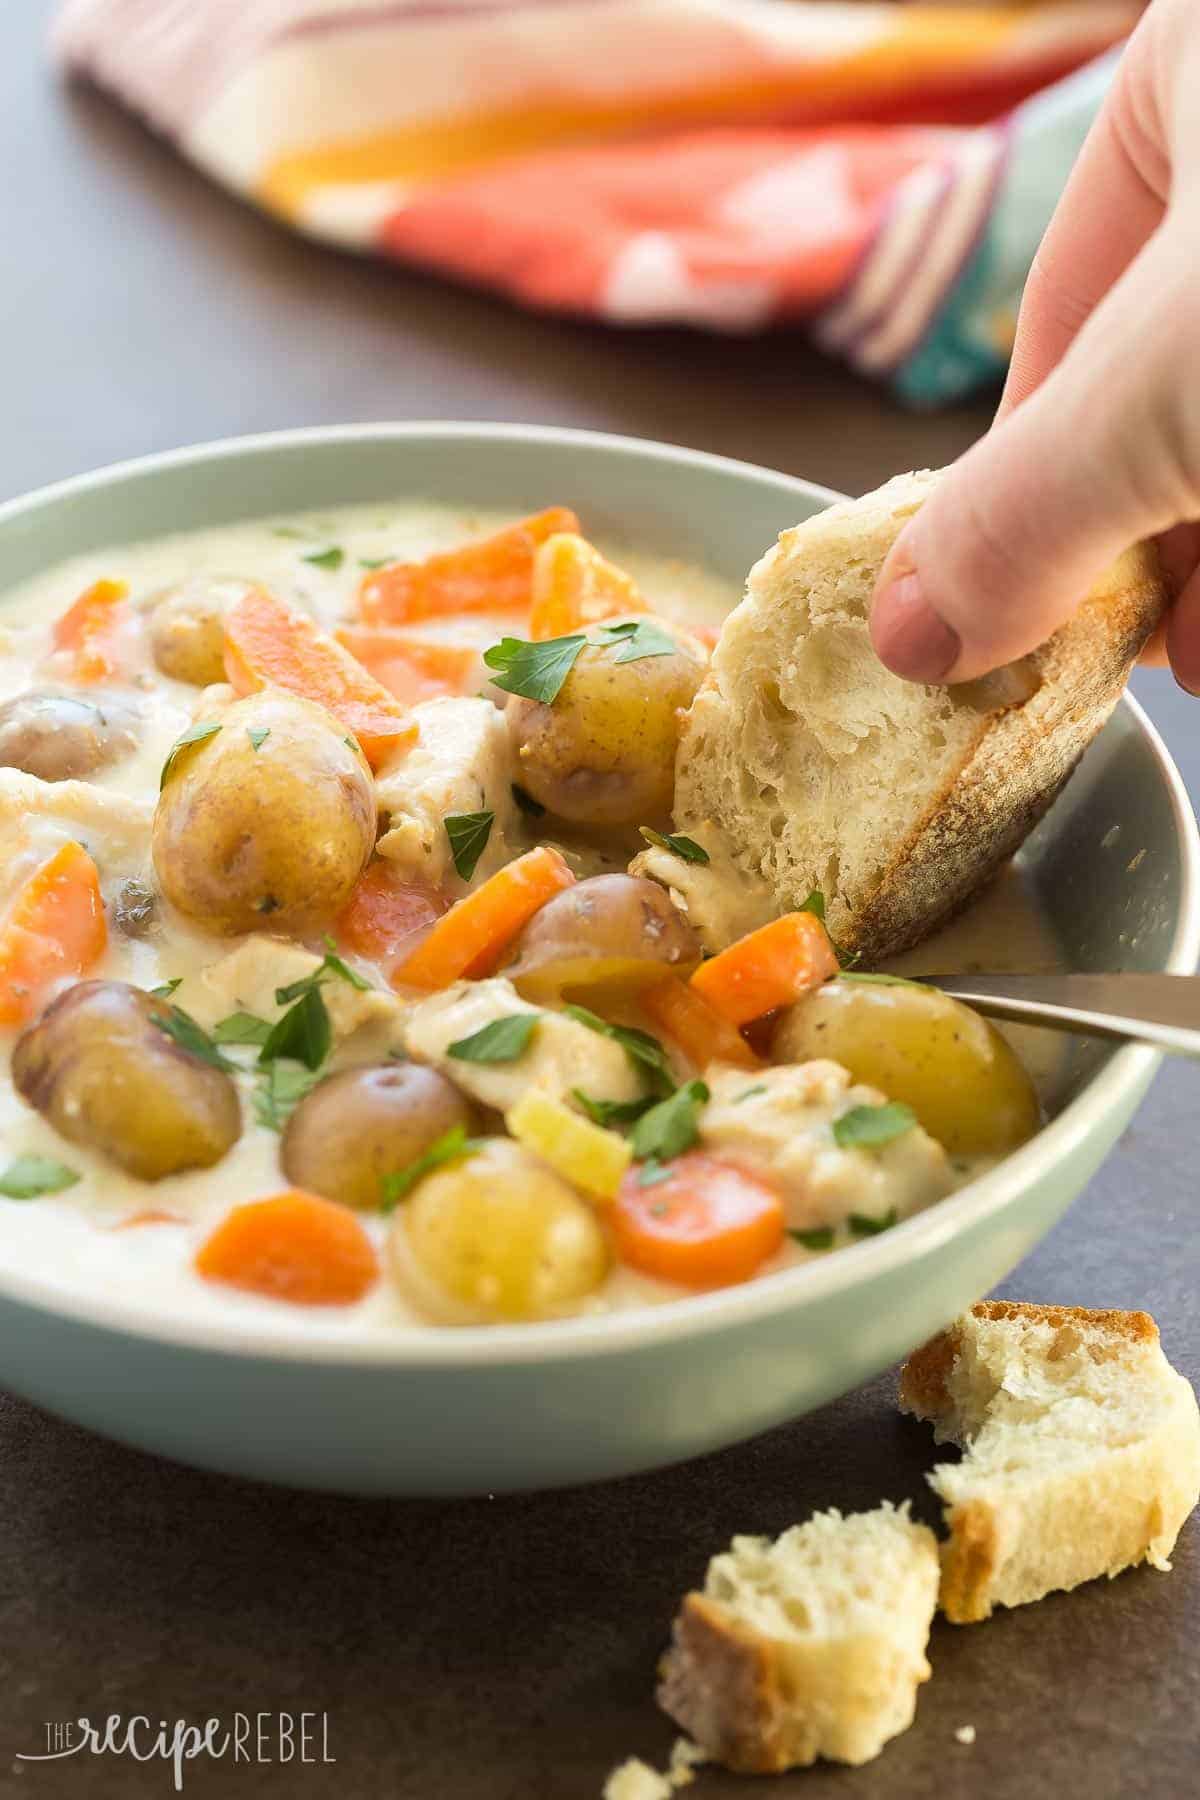 This Slow Cooker Garlic Parmesan Chicken Stew is bound to be your new favorite winter comfort food! It's hearty, creamy, cheesy and loaded with vegetables! The crockpot makes it an easy weeknight meal.